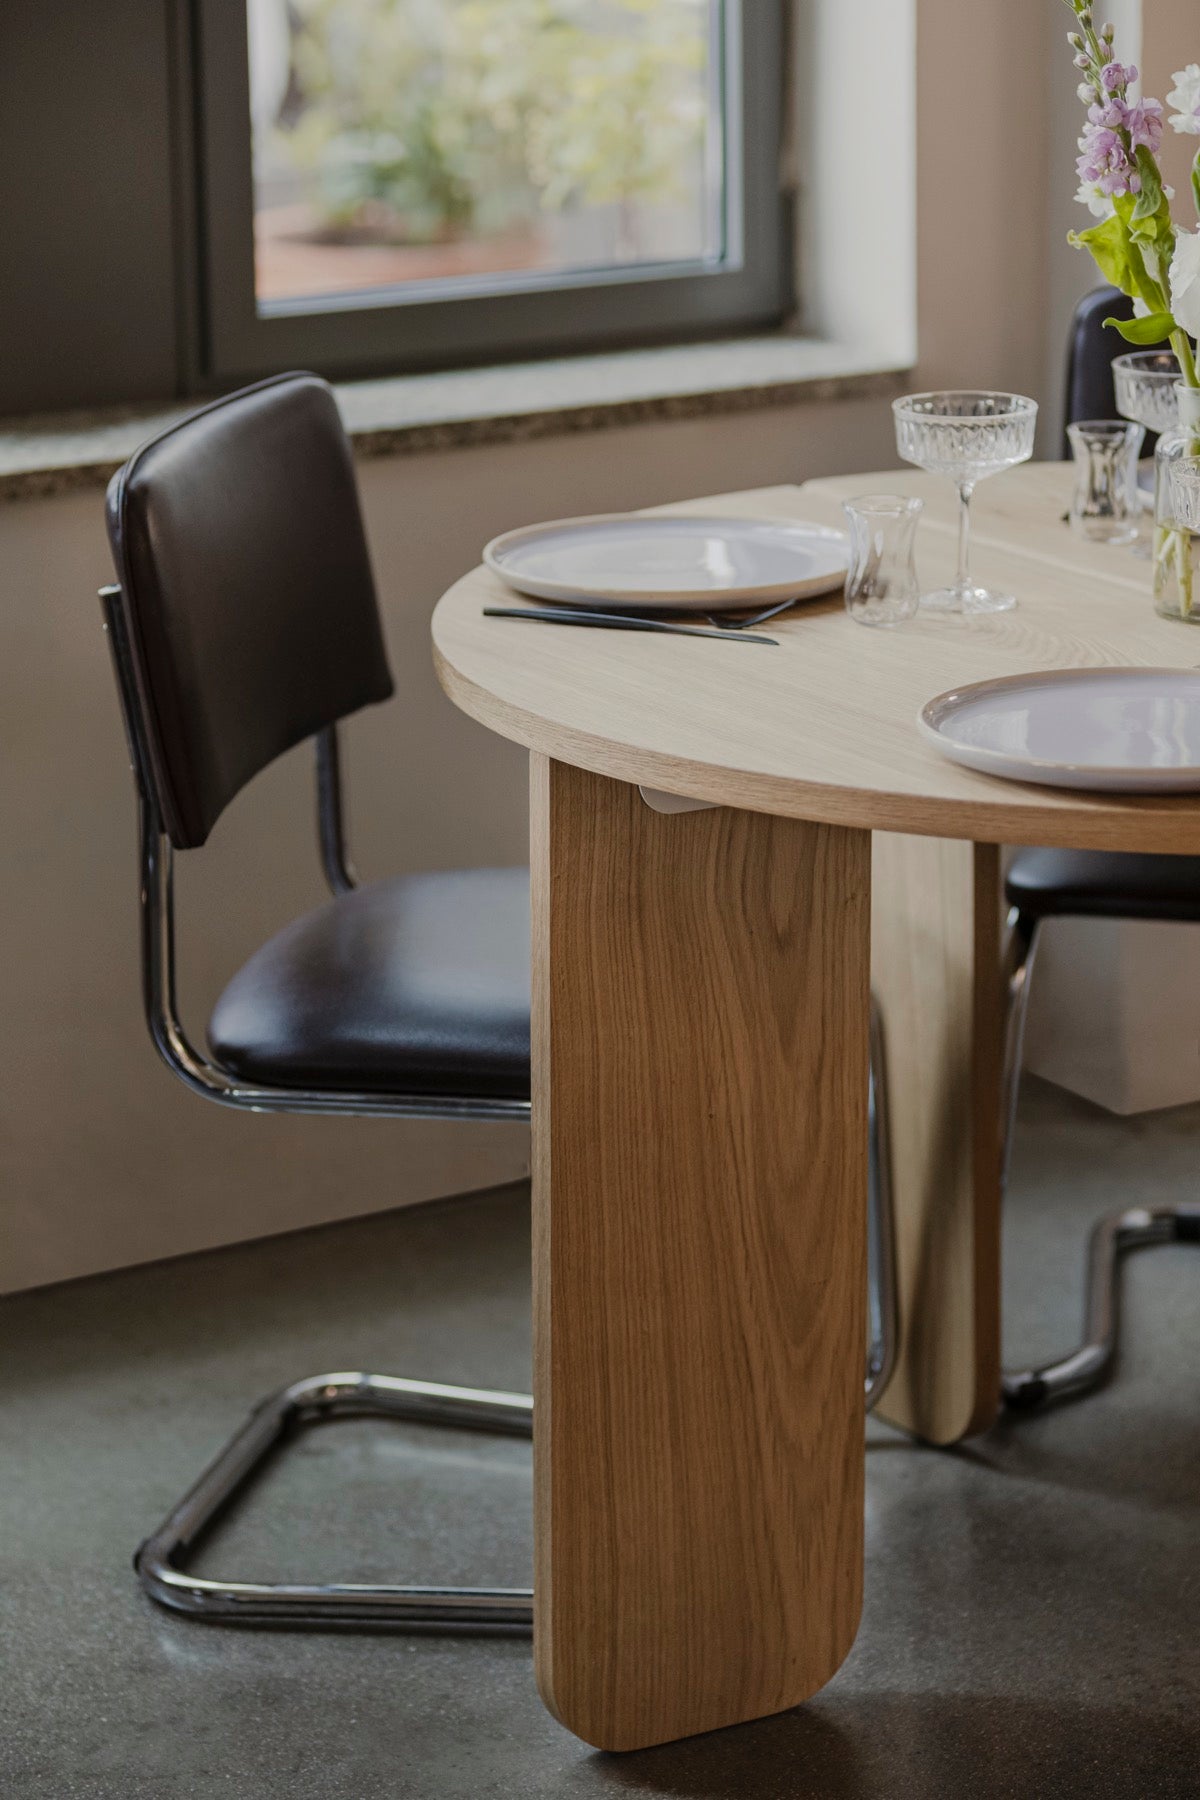 From intimate dinners to lavish feasts, modern dining room inspiration is just a few clicks away. Browse round & rectangular tables, benches, chairs, bar trolleys, and bar stools for japandi or minimalist spaces. Suitable for small and spacious homes.